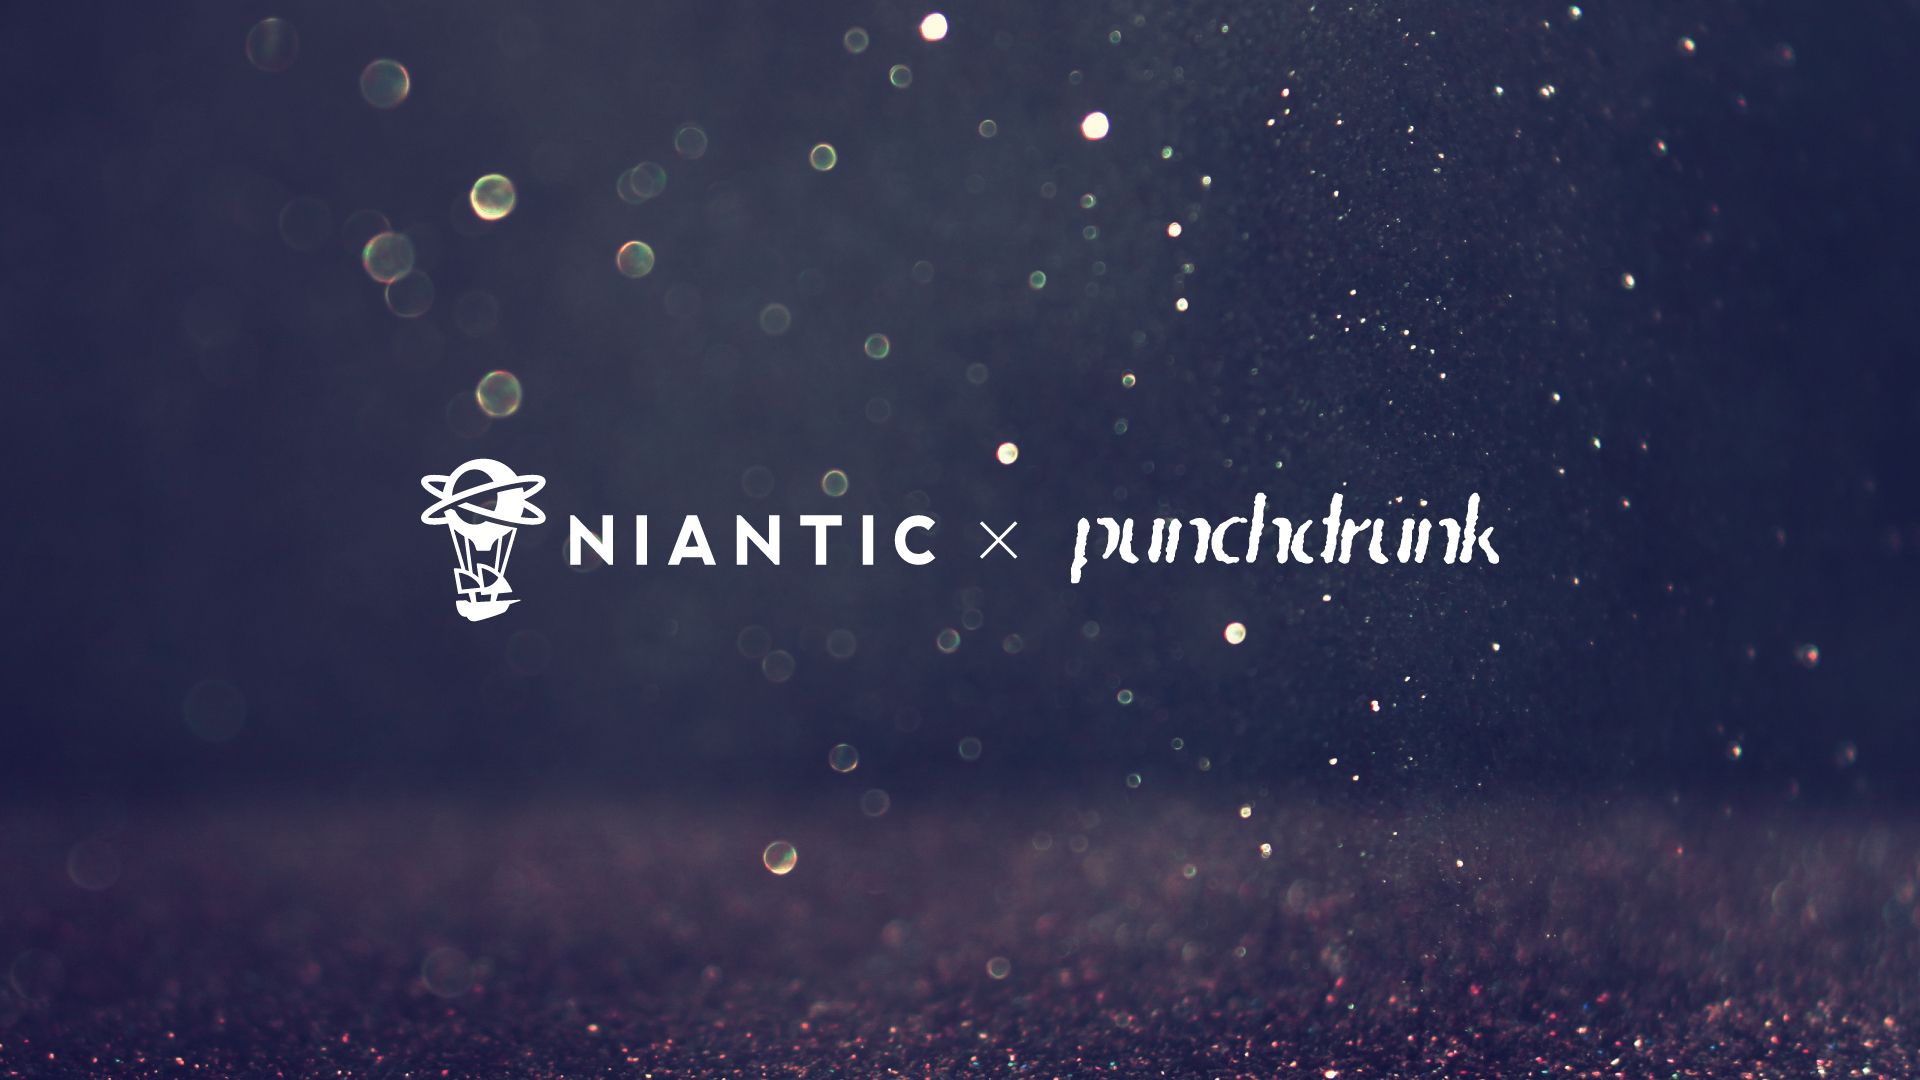 Niantic, Sleep No More, Punchdrunk, iOS, Android